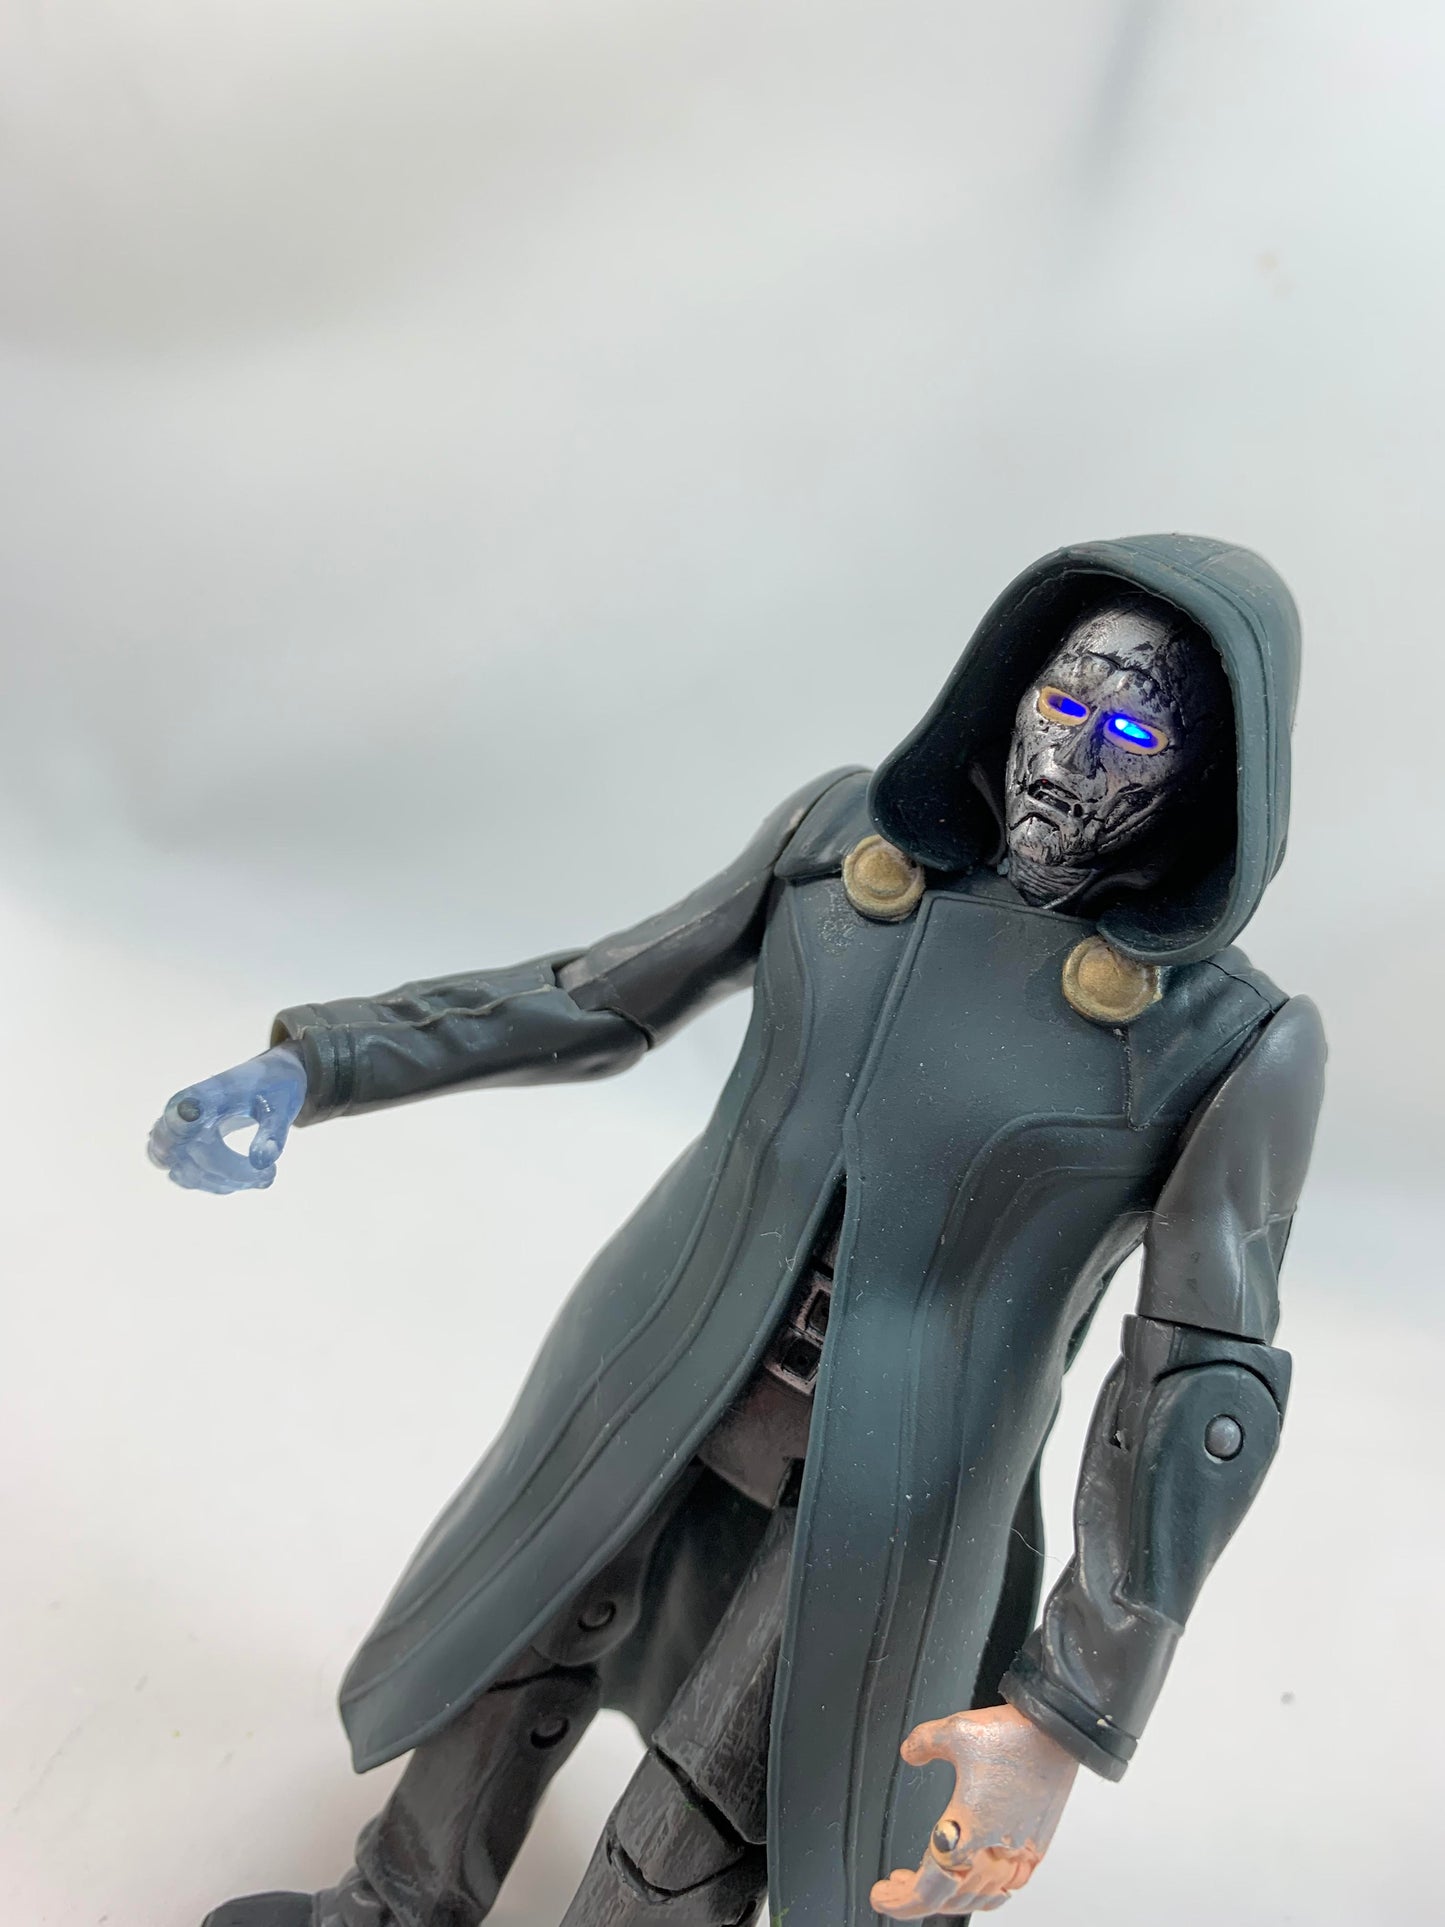 Toy Biz Fantastic Four Movie Electric Power Doctor Doom 2005 with light up eyes hands (working order) - Loose